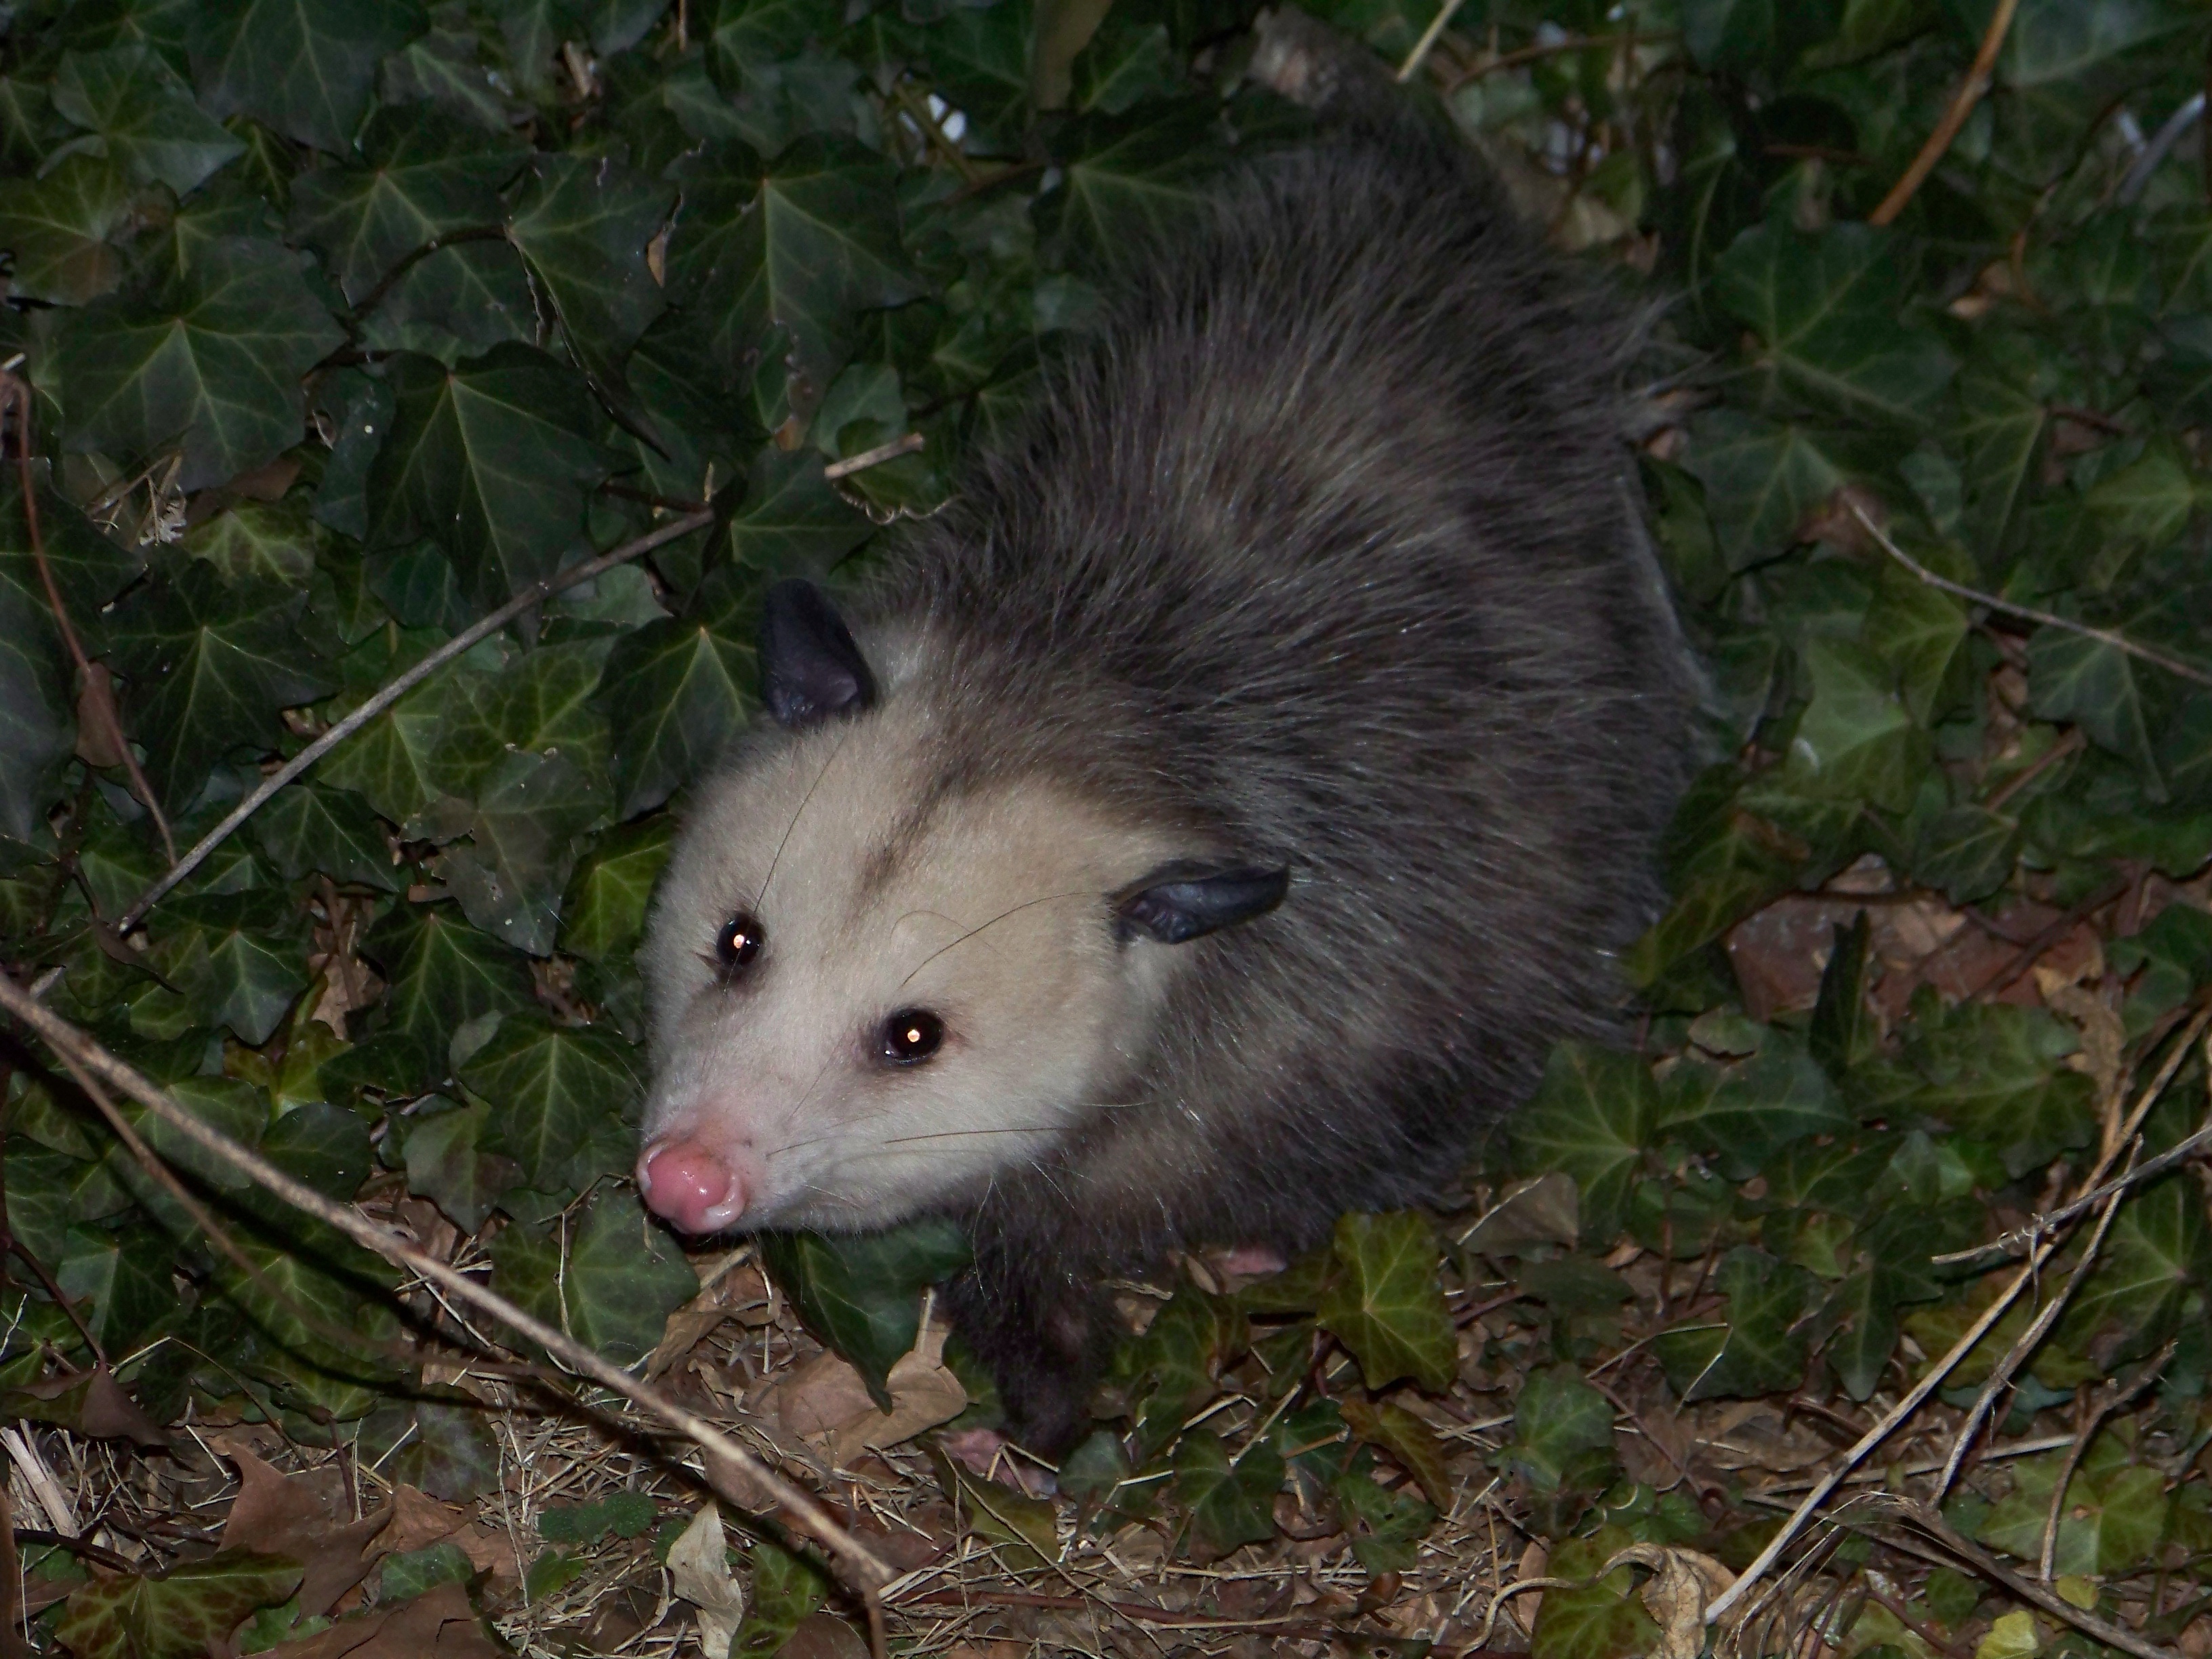 Grey opossum with coarse hair, whitish, tapering face sporting a pronounced "widows peak," black eyes and pink nose looks up from a bed of green ivy.